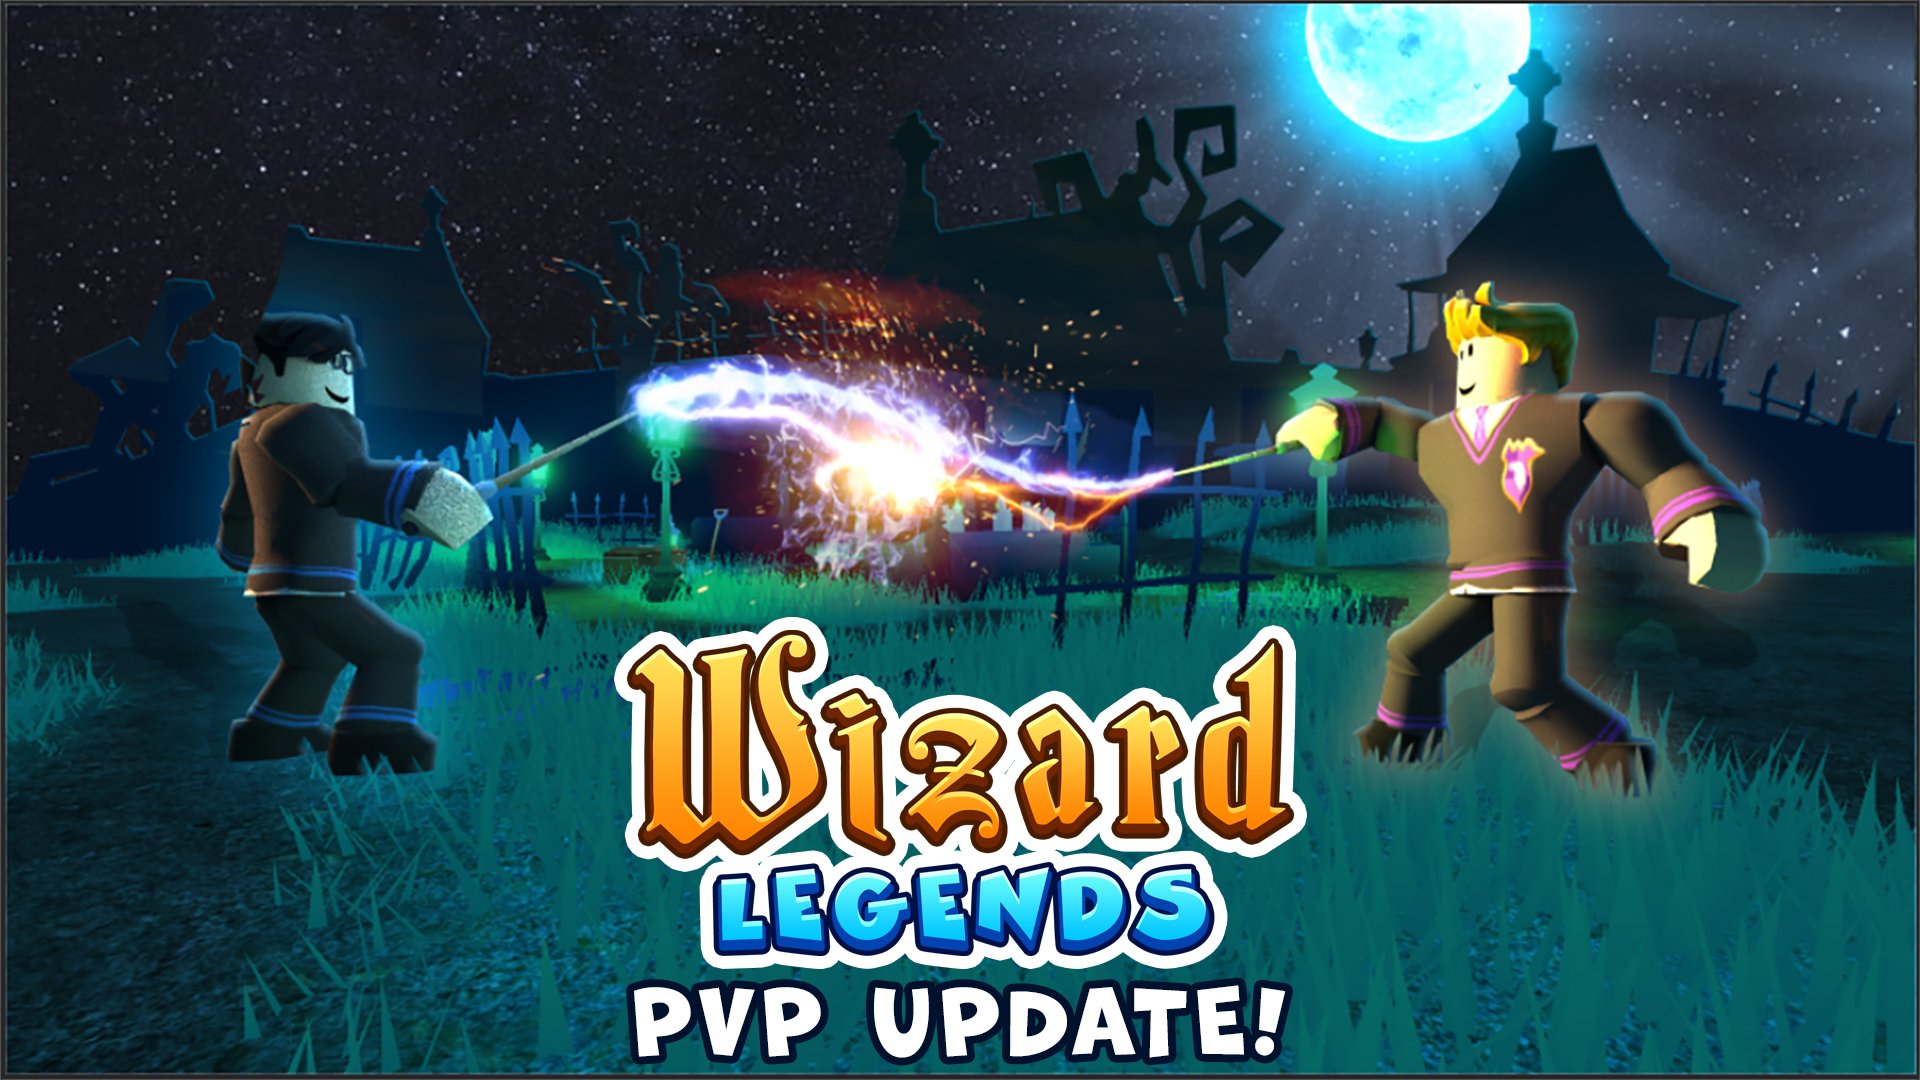 The Gang Gaming on X: Tomorrow we release an update including lore books  with the tales from the world of Wizard Legends! #Roblox #robloxdeveloper  #wizardlegends  / X